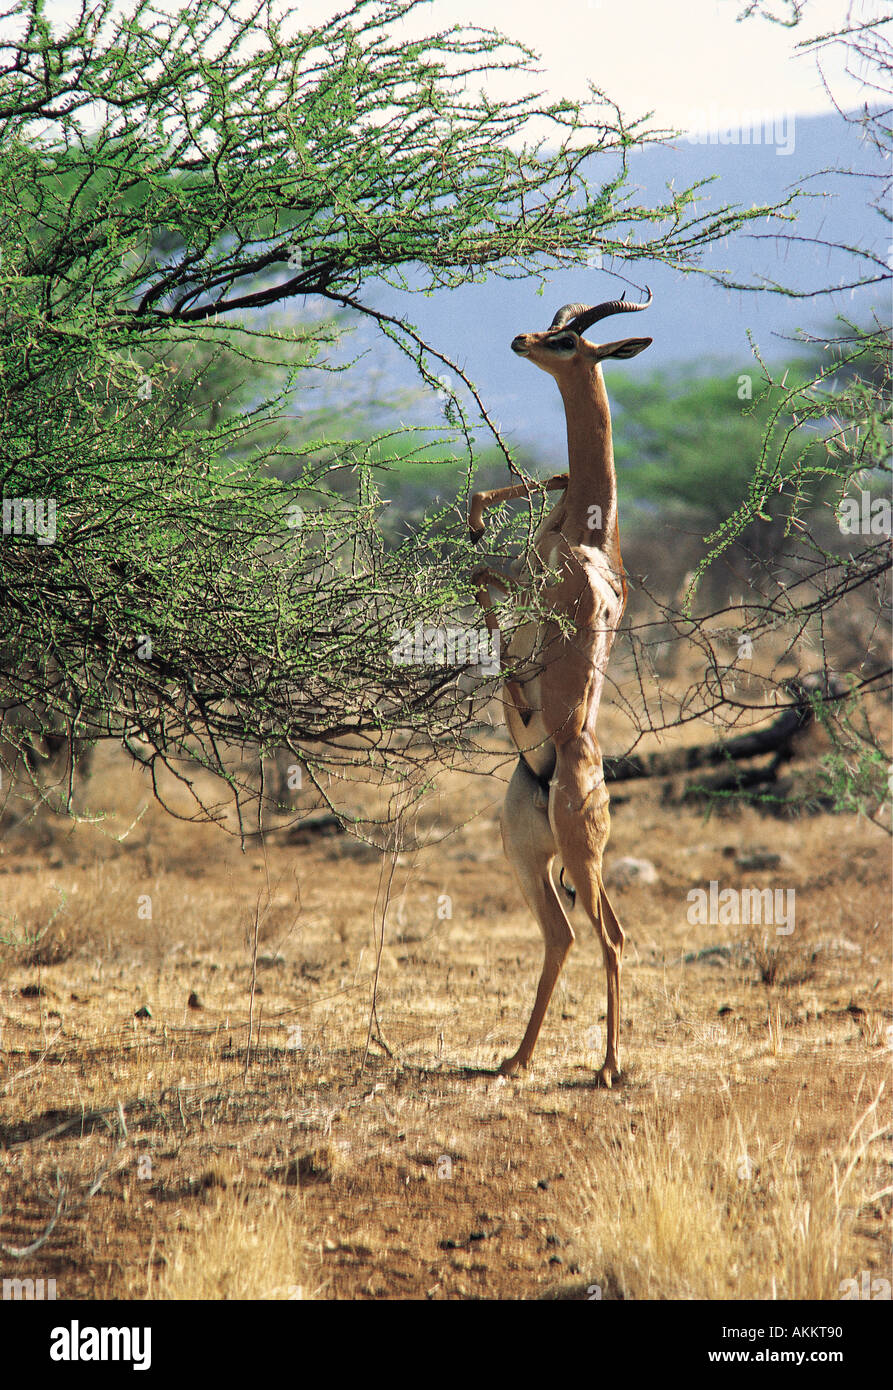 Male Gerenuk browsing on an acacia bush by standing on its hind legs Stock Photo